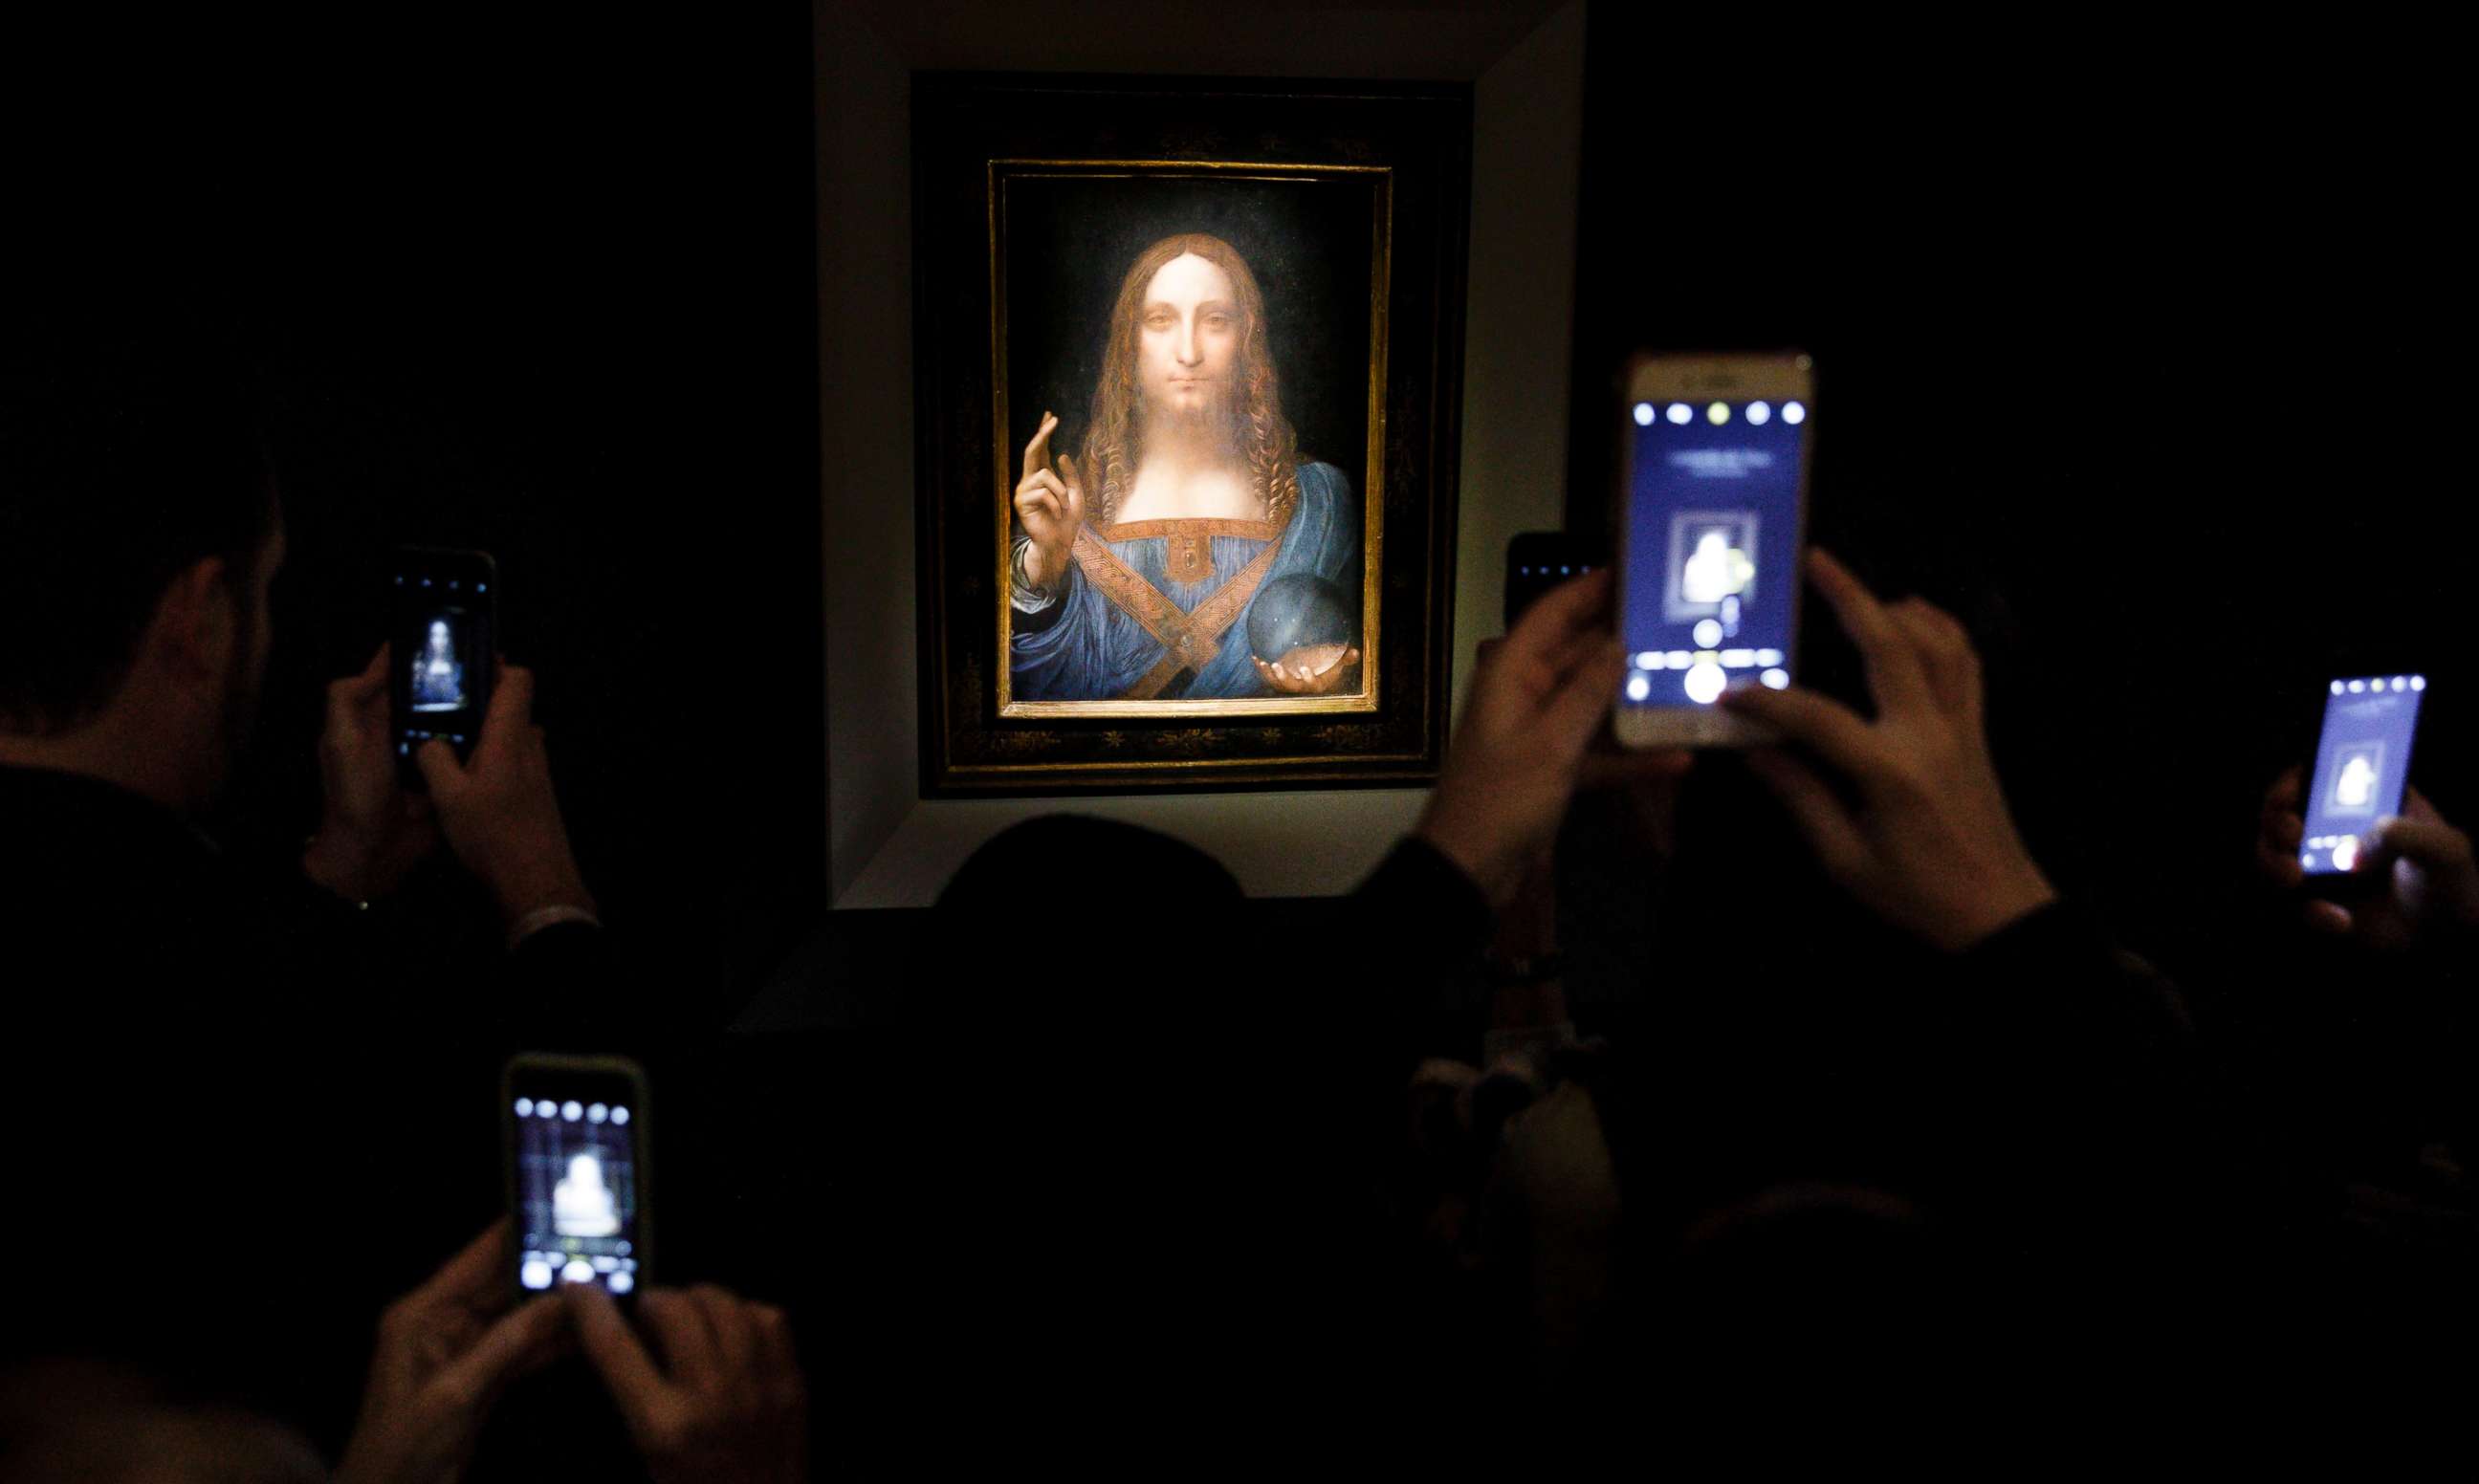 PHOTO: People take pictures of the painting 'Salvator Mundi' by Leonardo da Vinci (circa 1500) during a public preview before an auctioning of the painting tonight at Christie's auction house in New York, Nov. 15, 2017. 